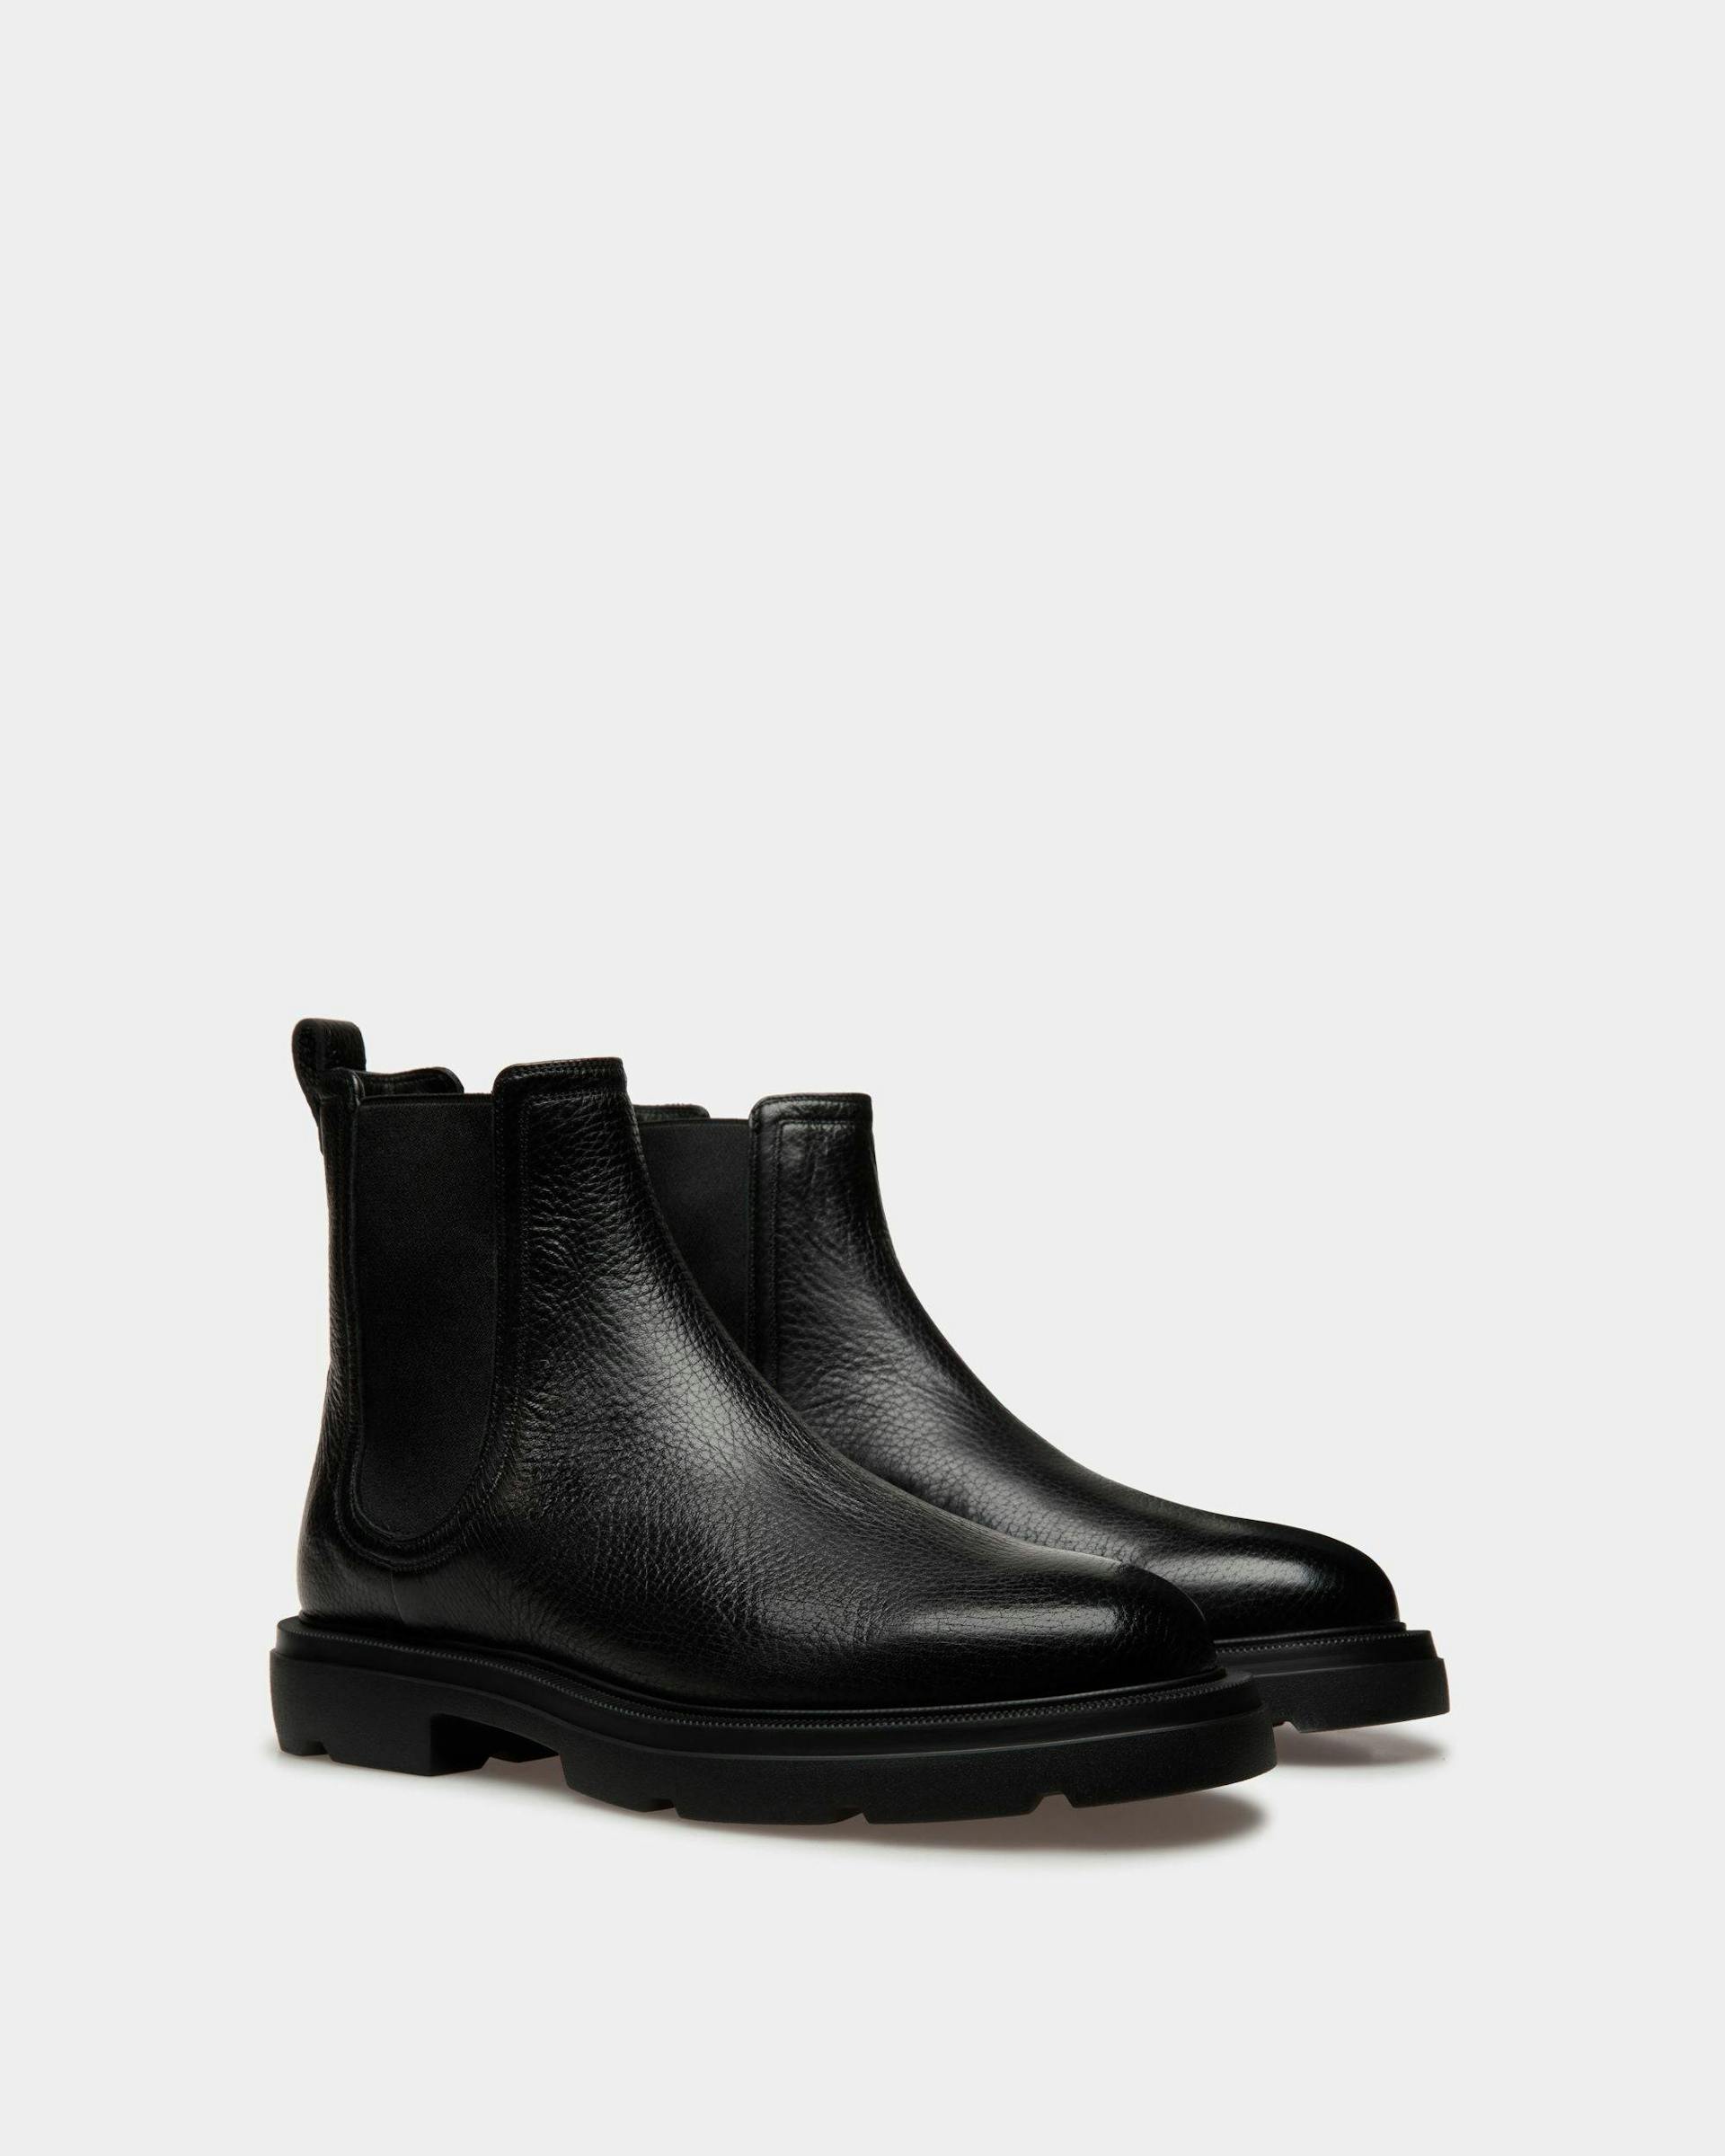 Men's Zurich Booties In Black Leather | Bally | Still Life 3/4 Front